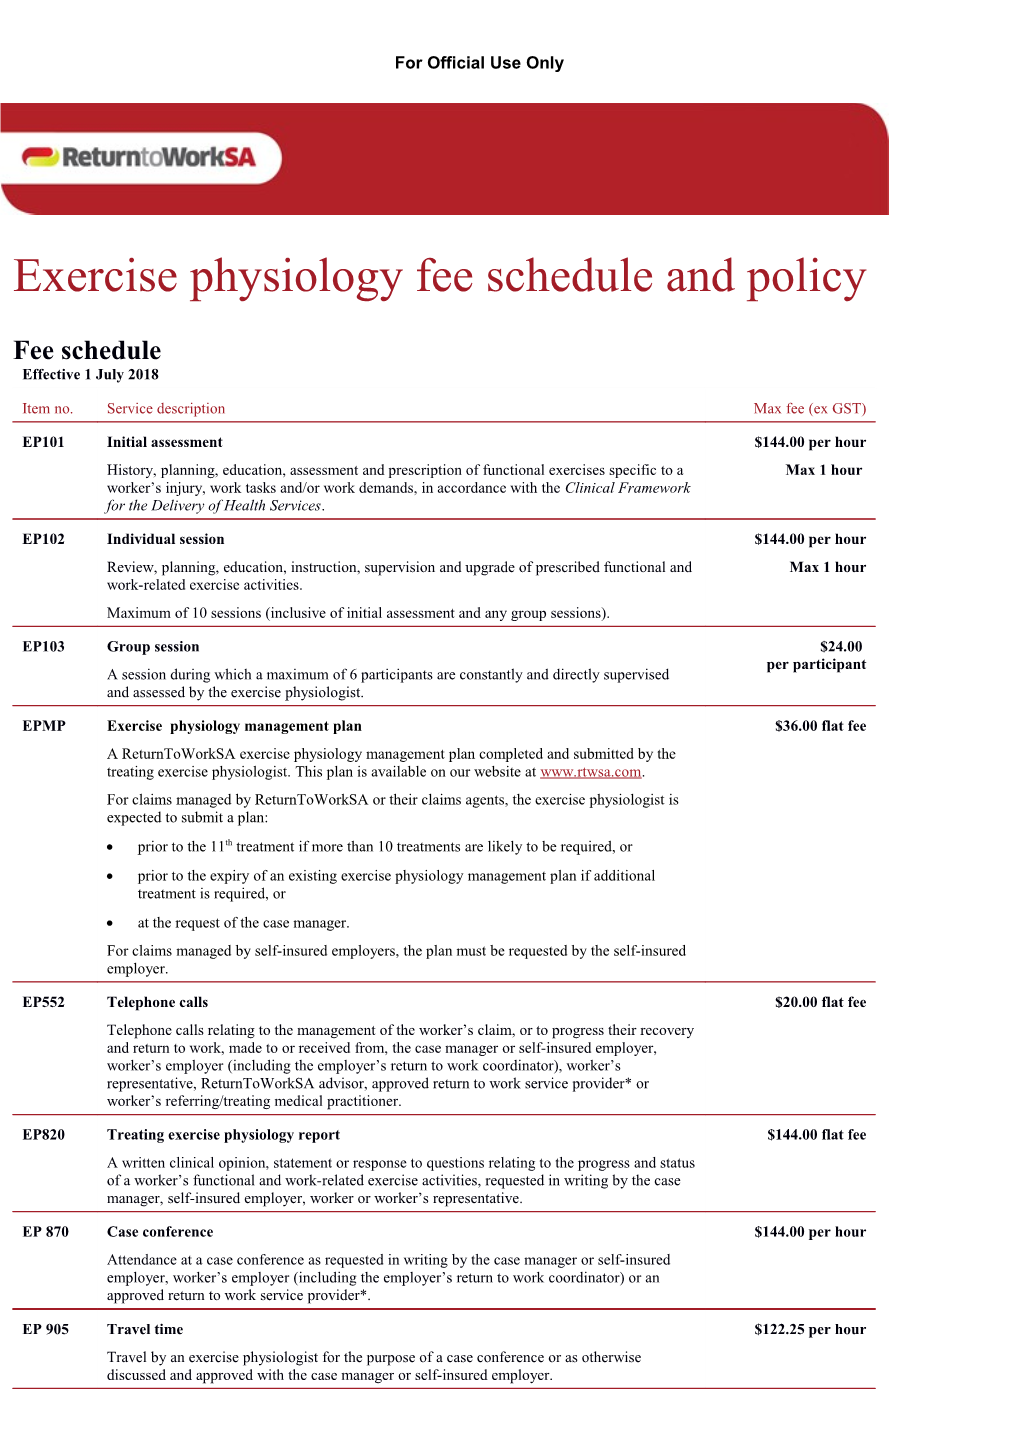 Exercise Physiology Fee Schedule and Policy